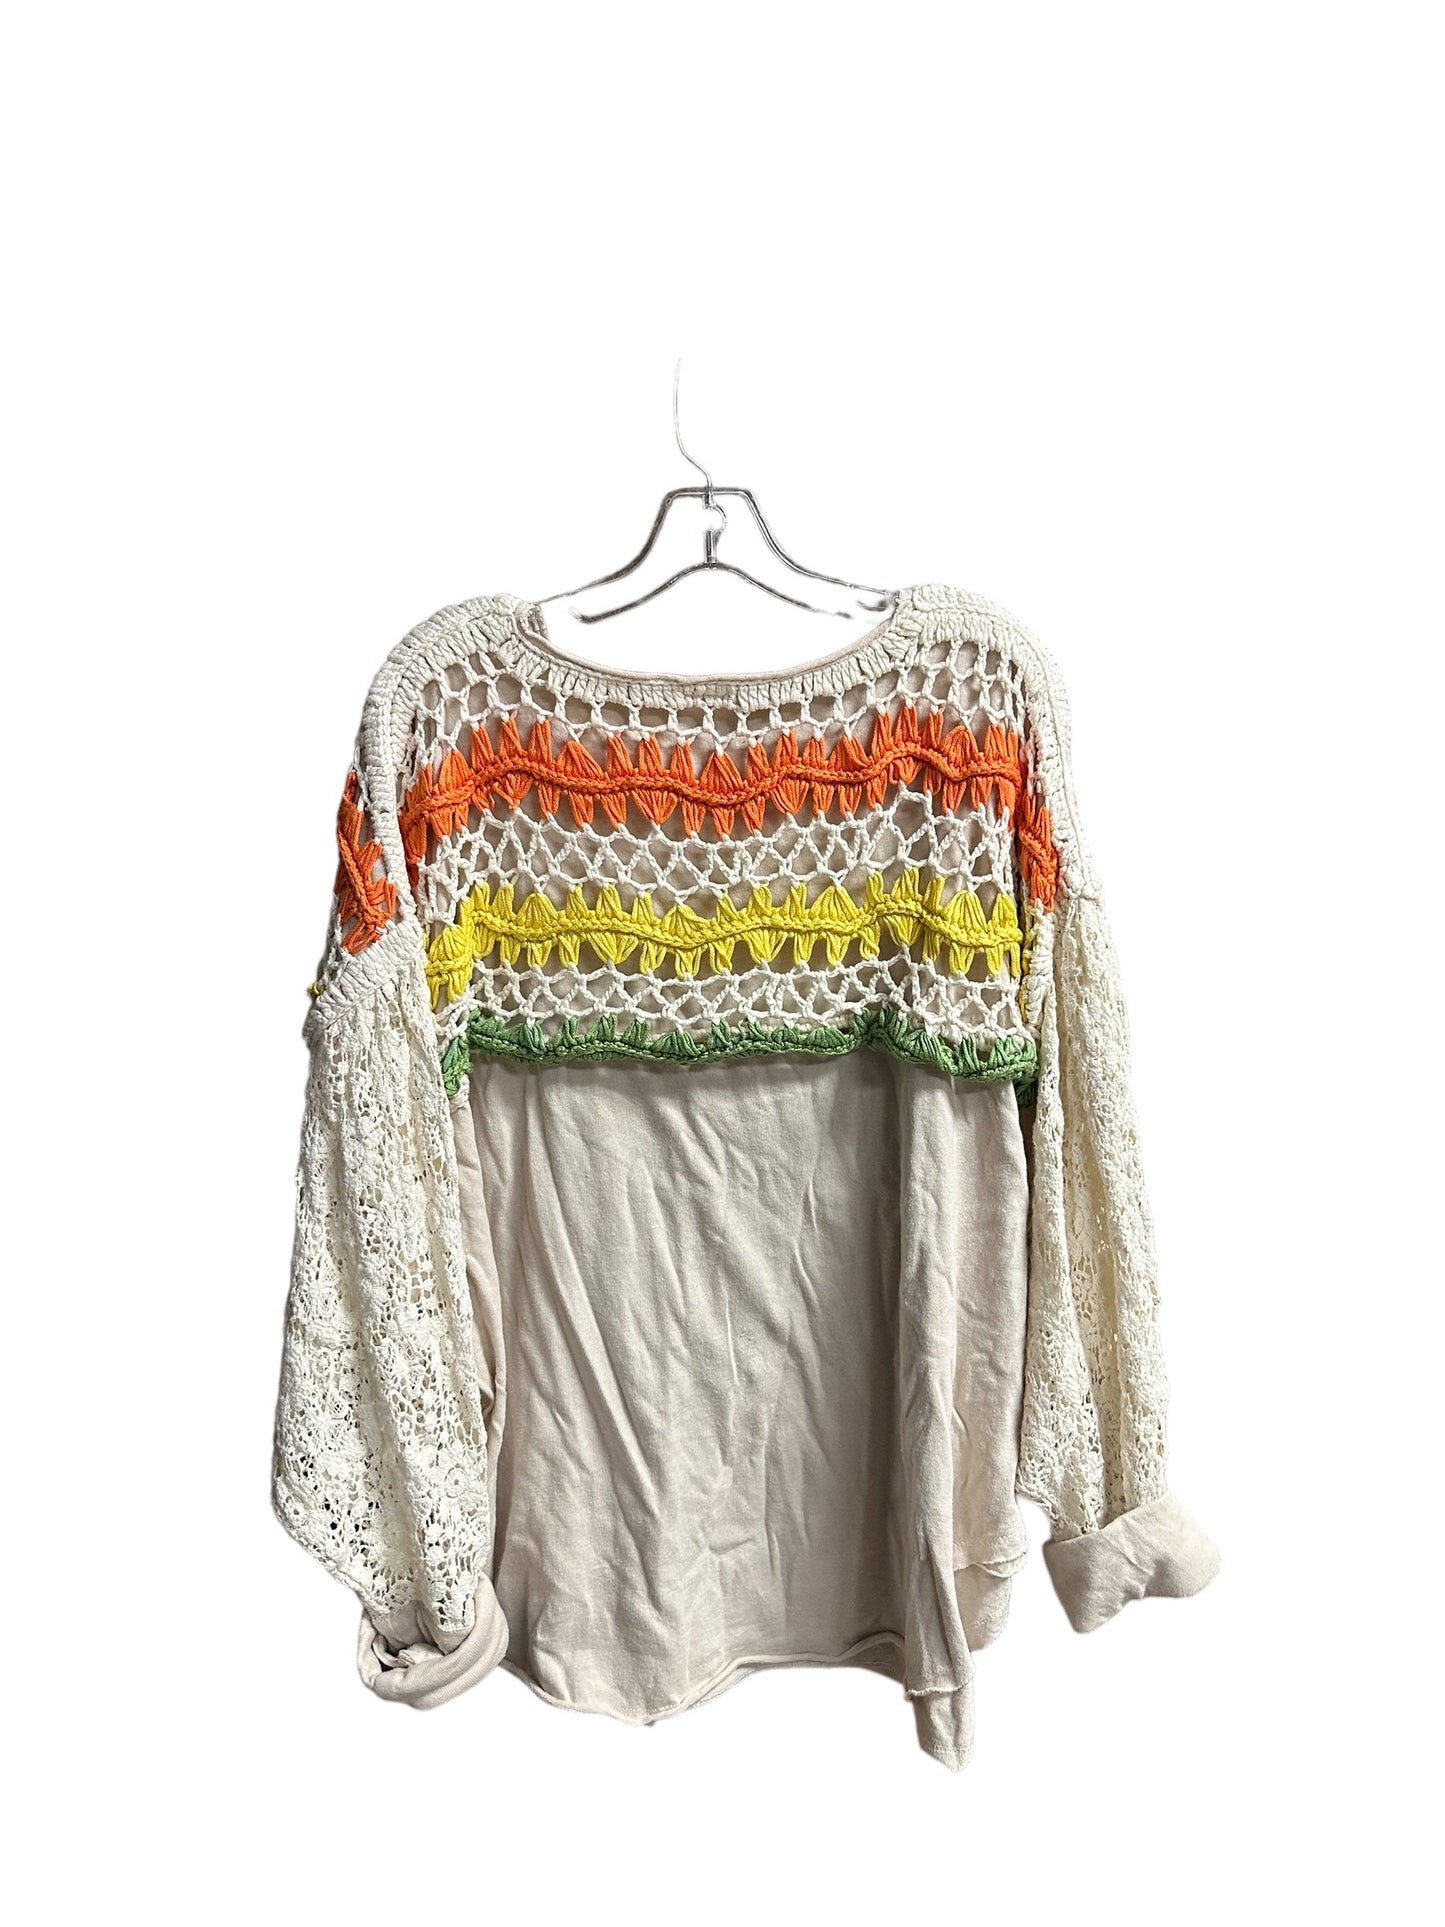 Multi-colored Top Long Sleeve Free People, Size L